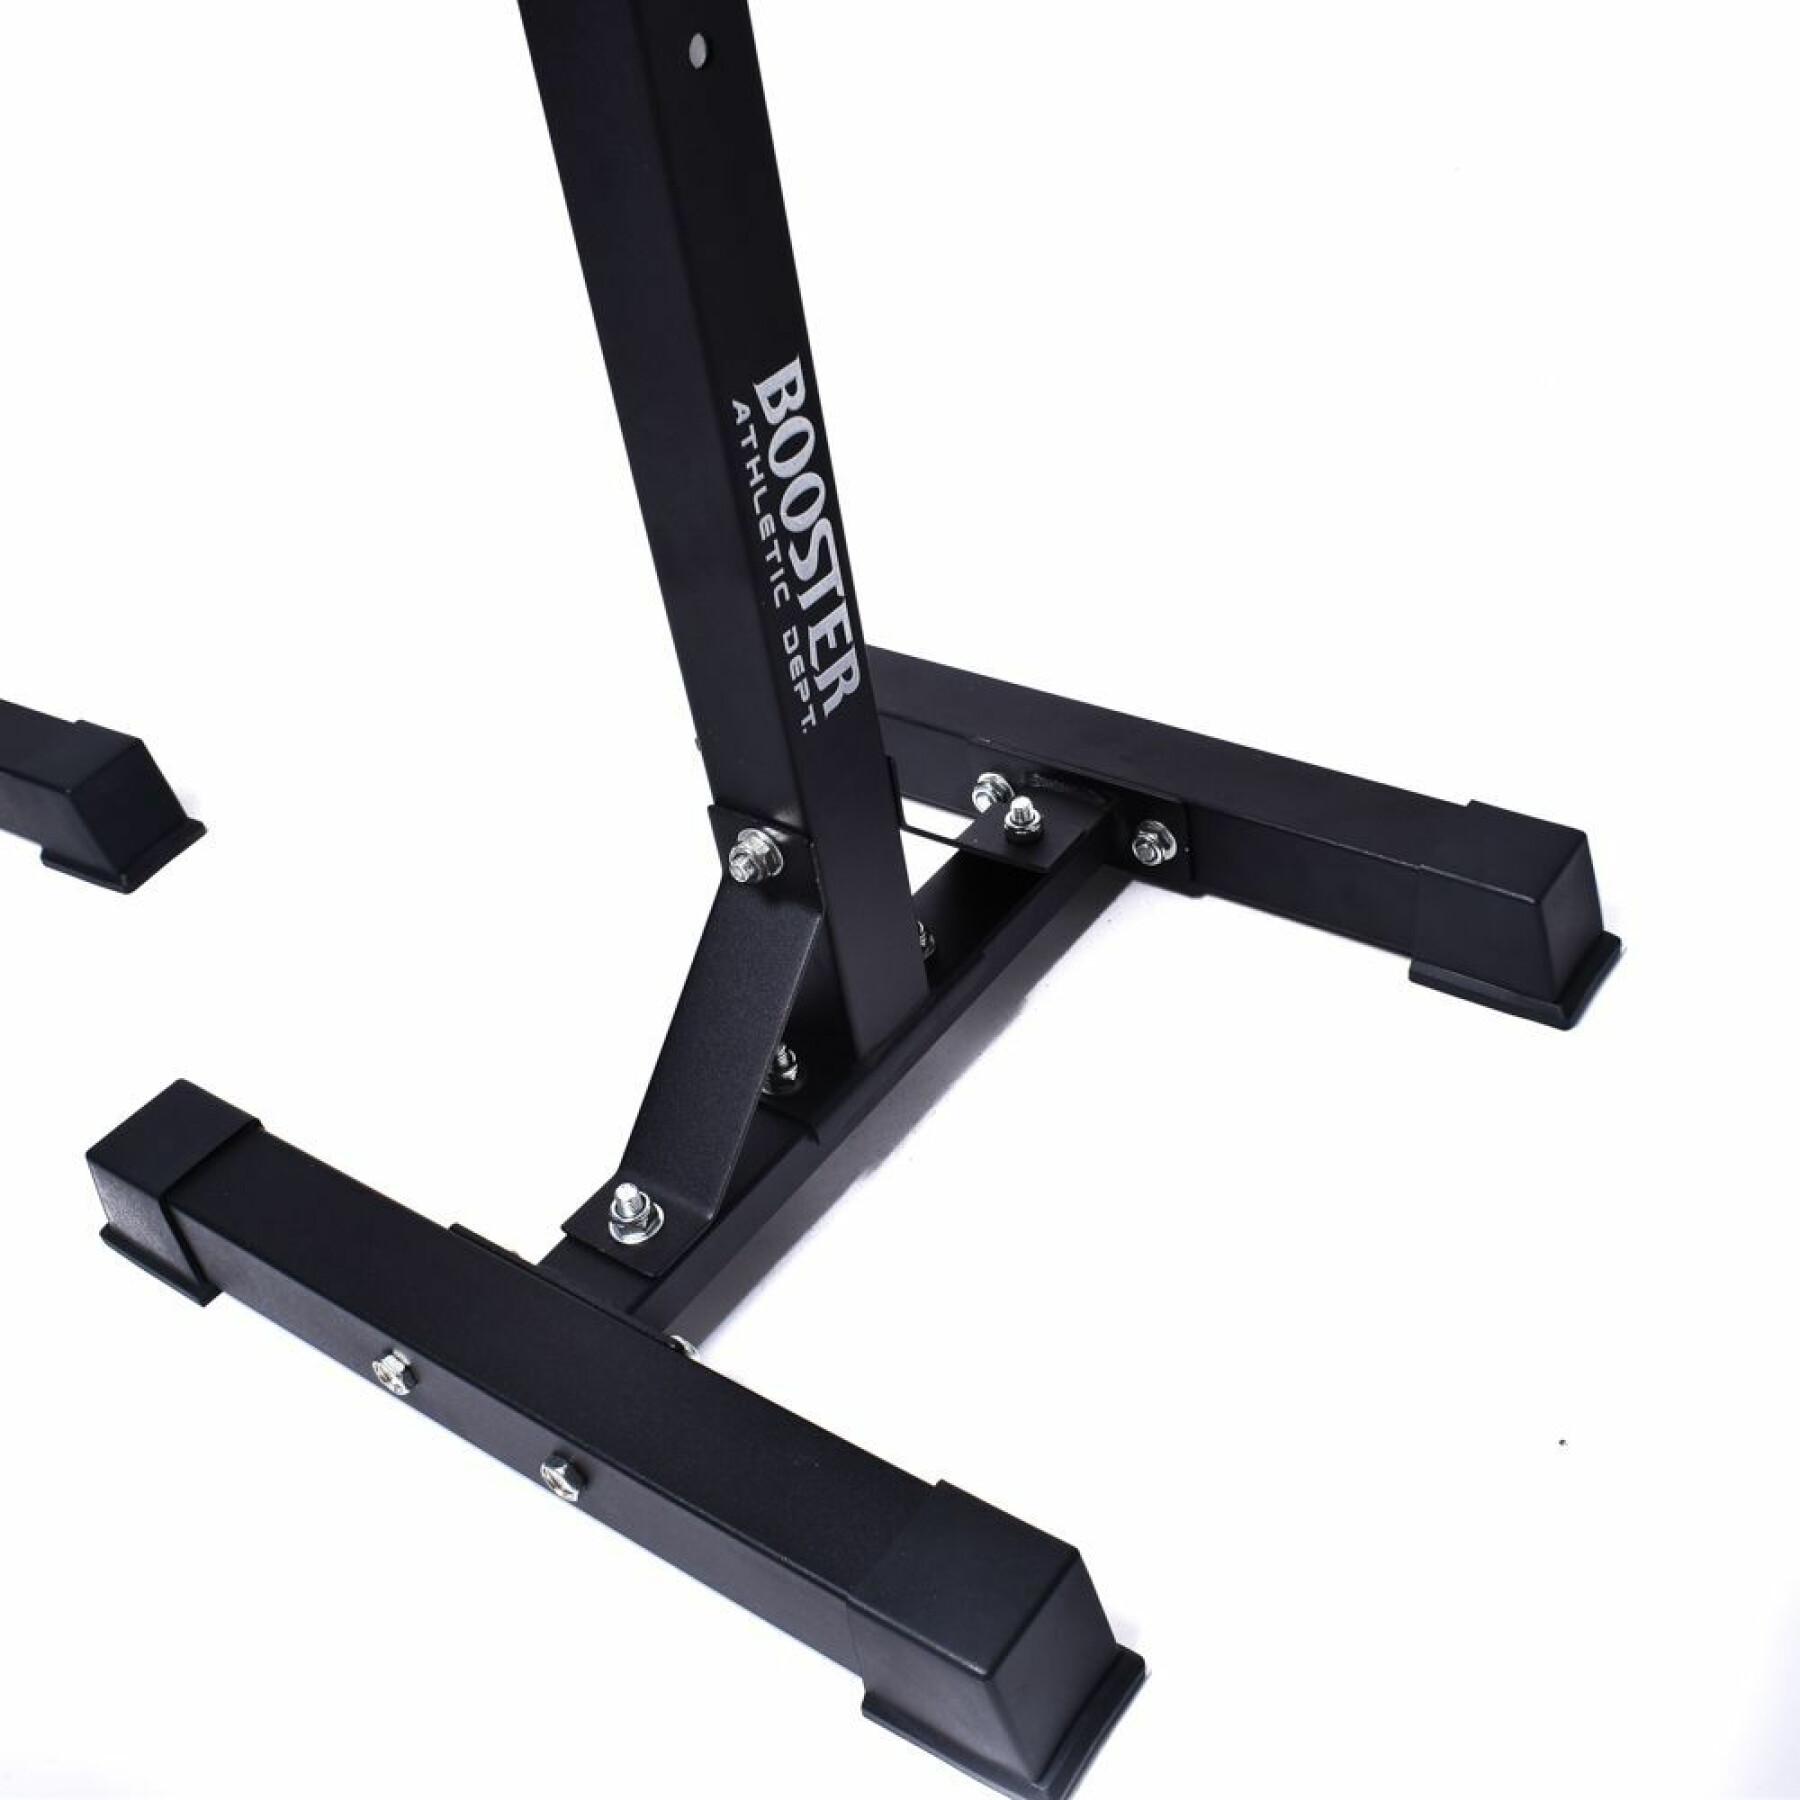 Bar support Booster Fight Gear Squat stand